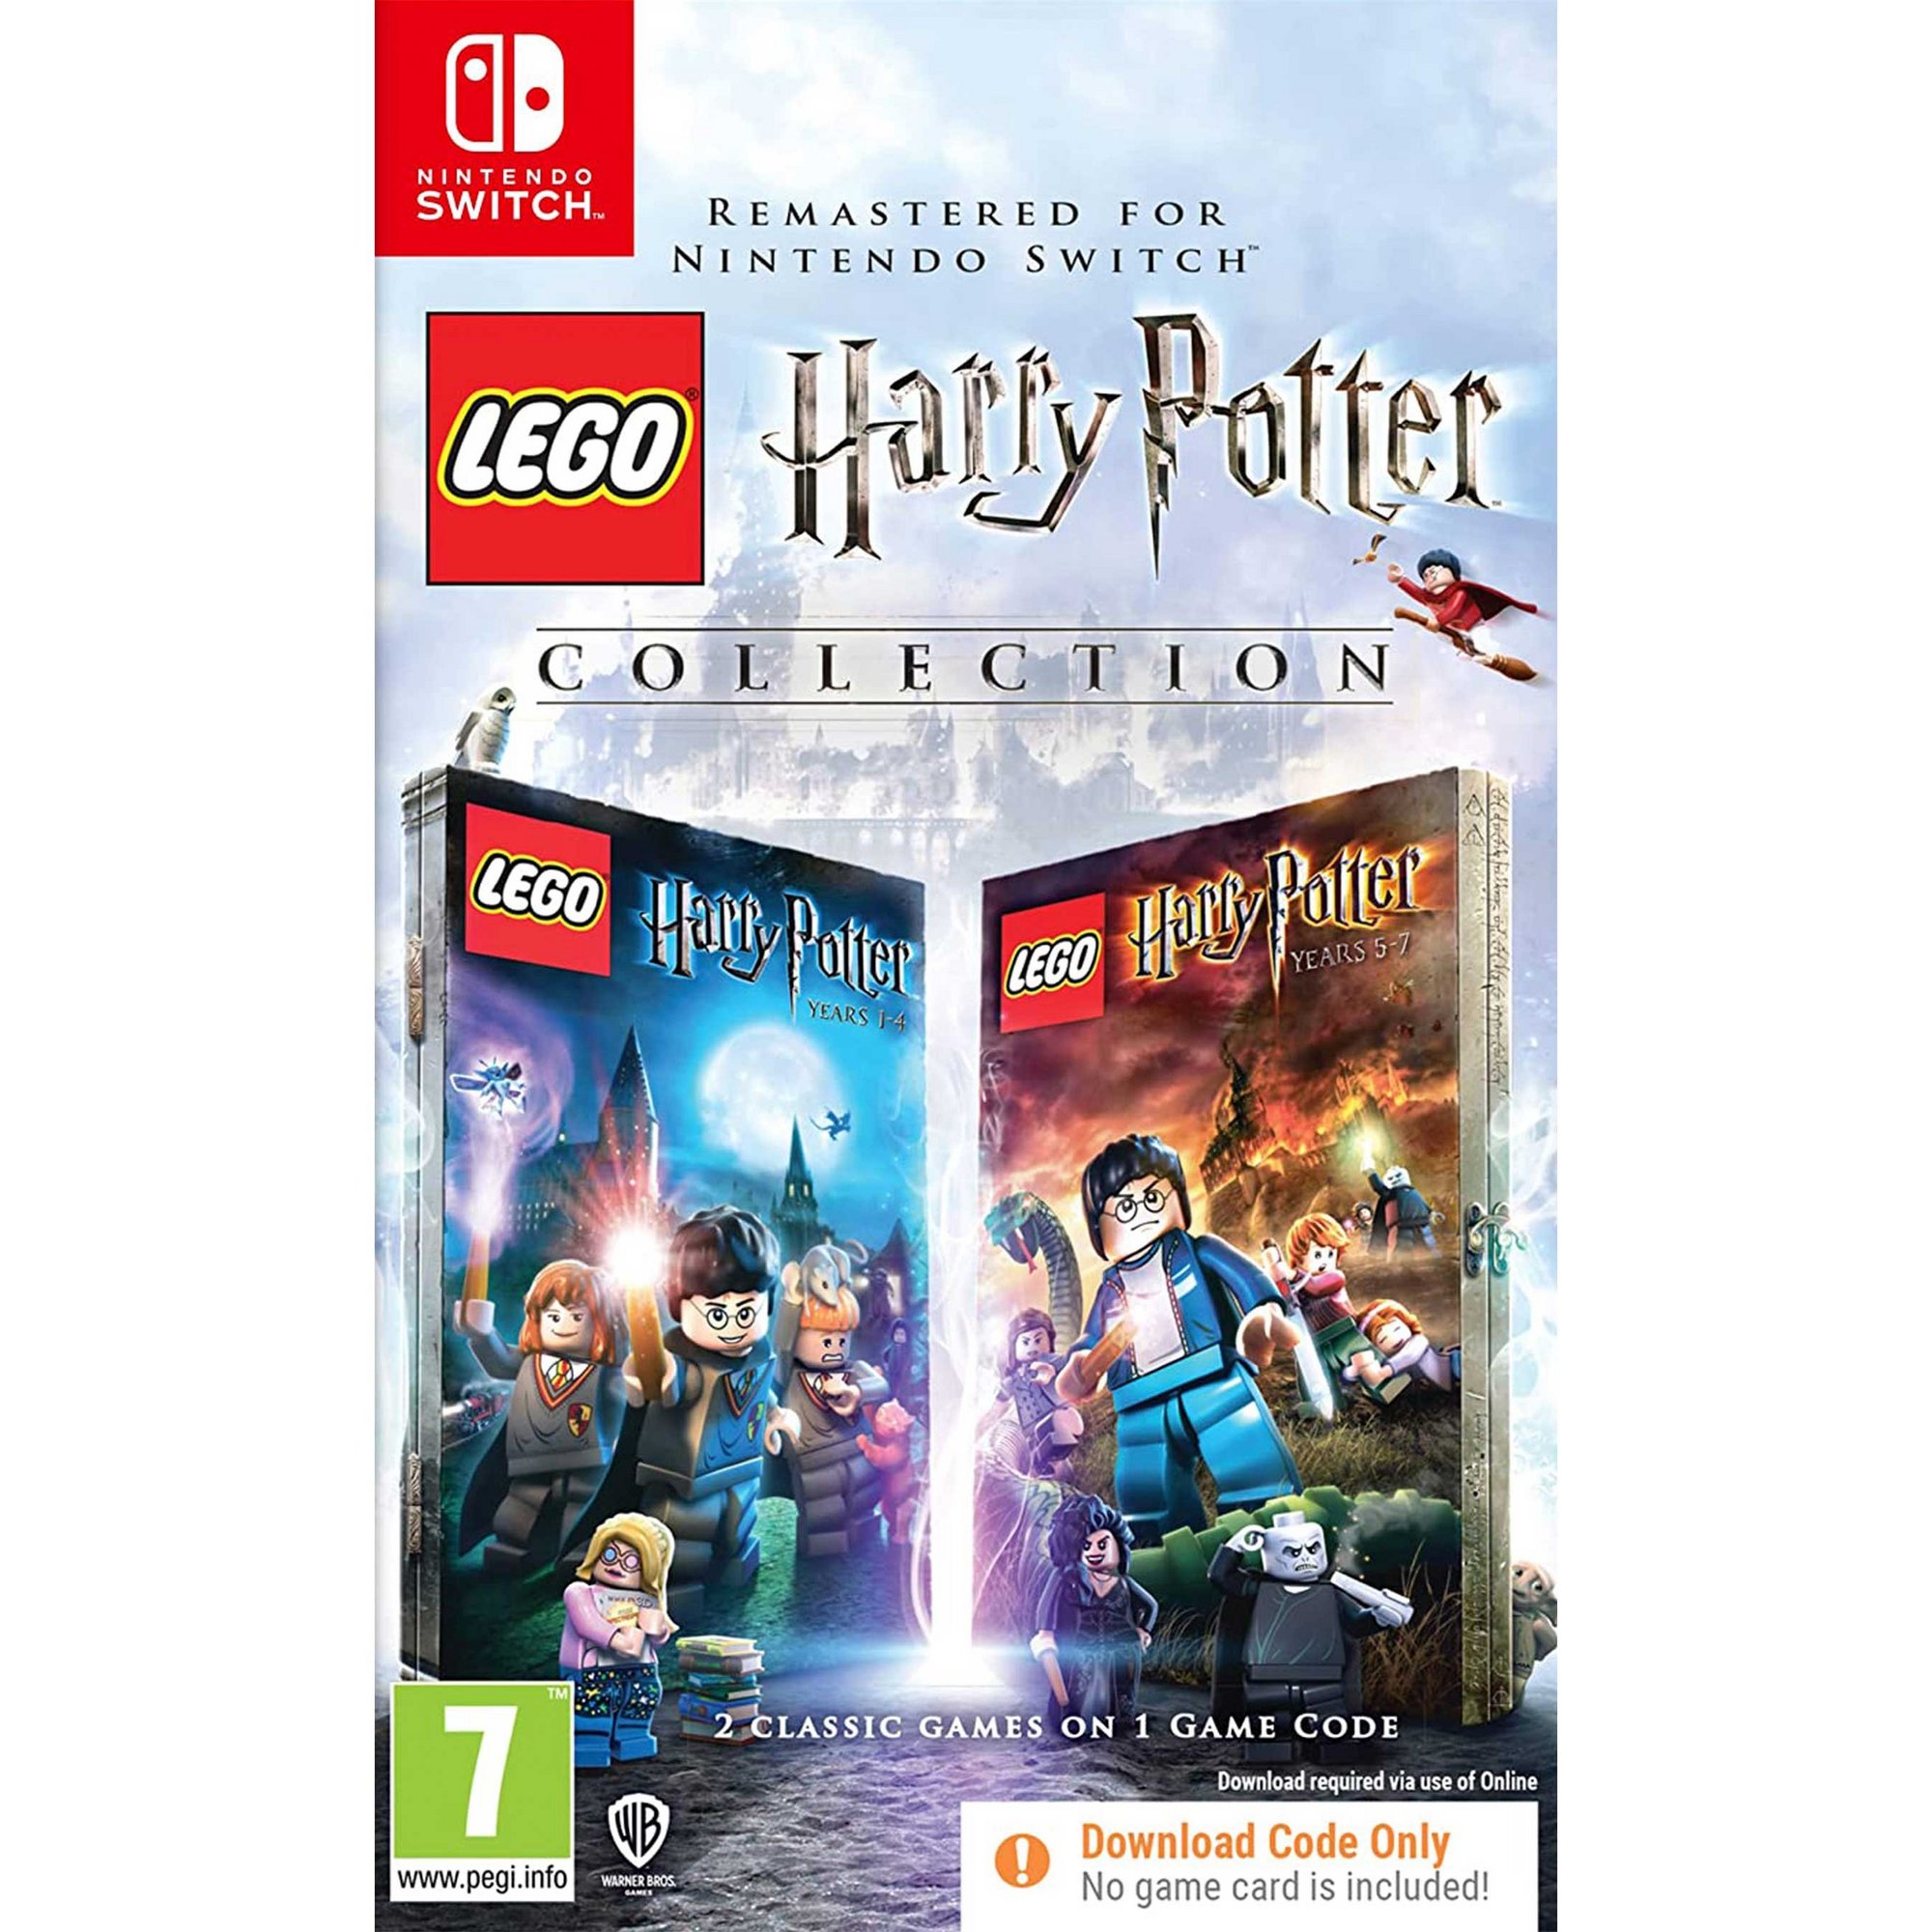 Nintendo Switch: Lego Harry Potter Collection Download Code and Case